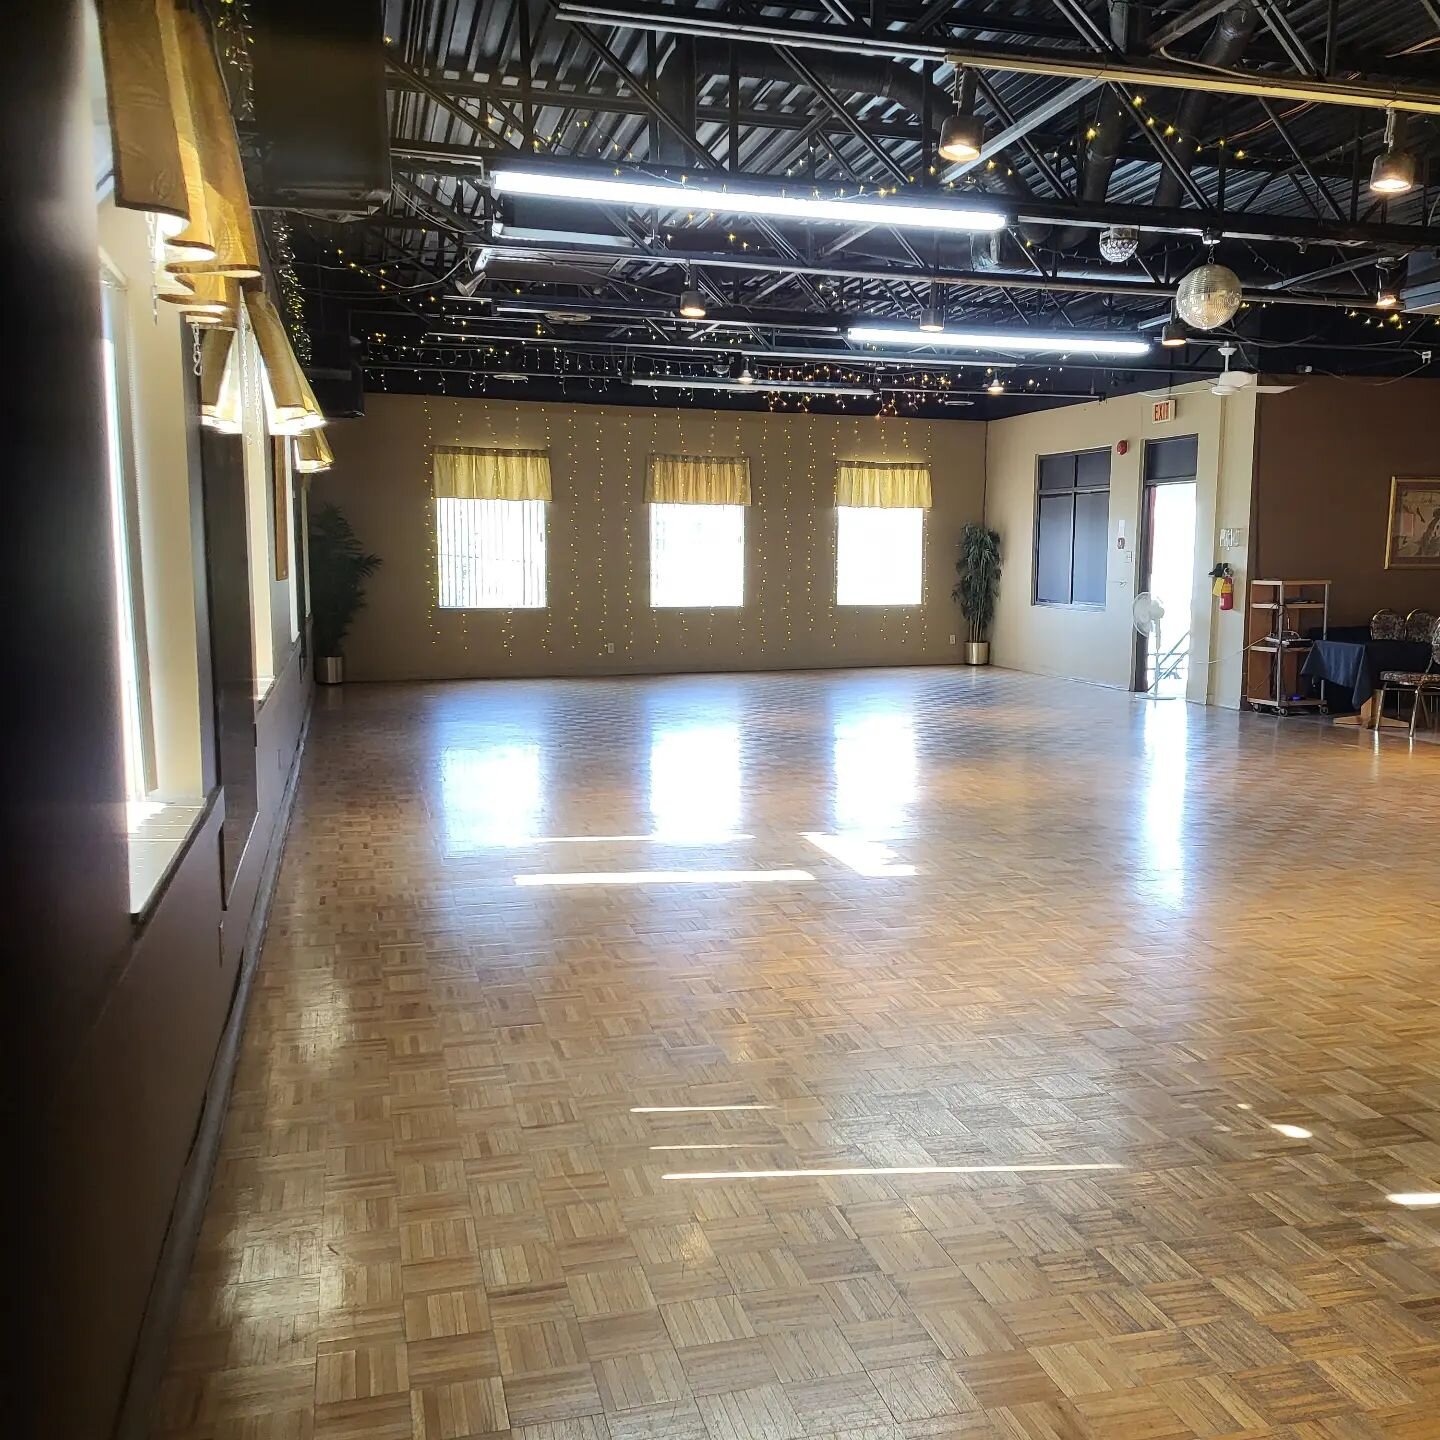 Windows open, doors open, fans on, and it's super nice and cool in the studio! Hope to see you on the dance floor tonight.  Sing lesson at 6:30pm and social dancing from 7:15-9:15pm. $15/person,  water and hugs included!